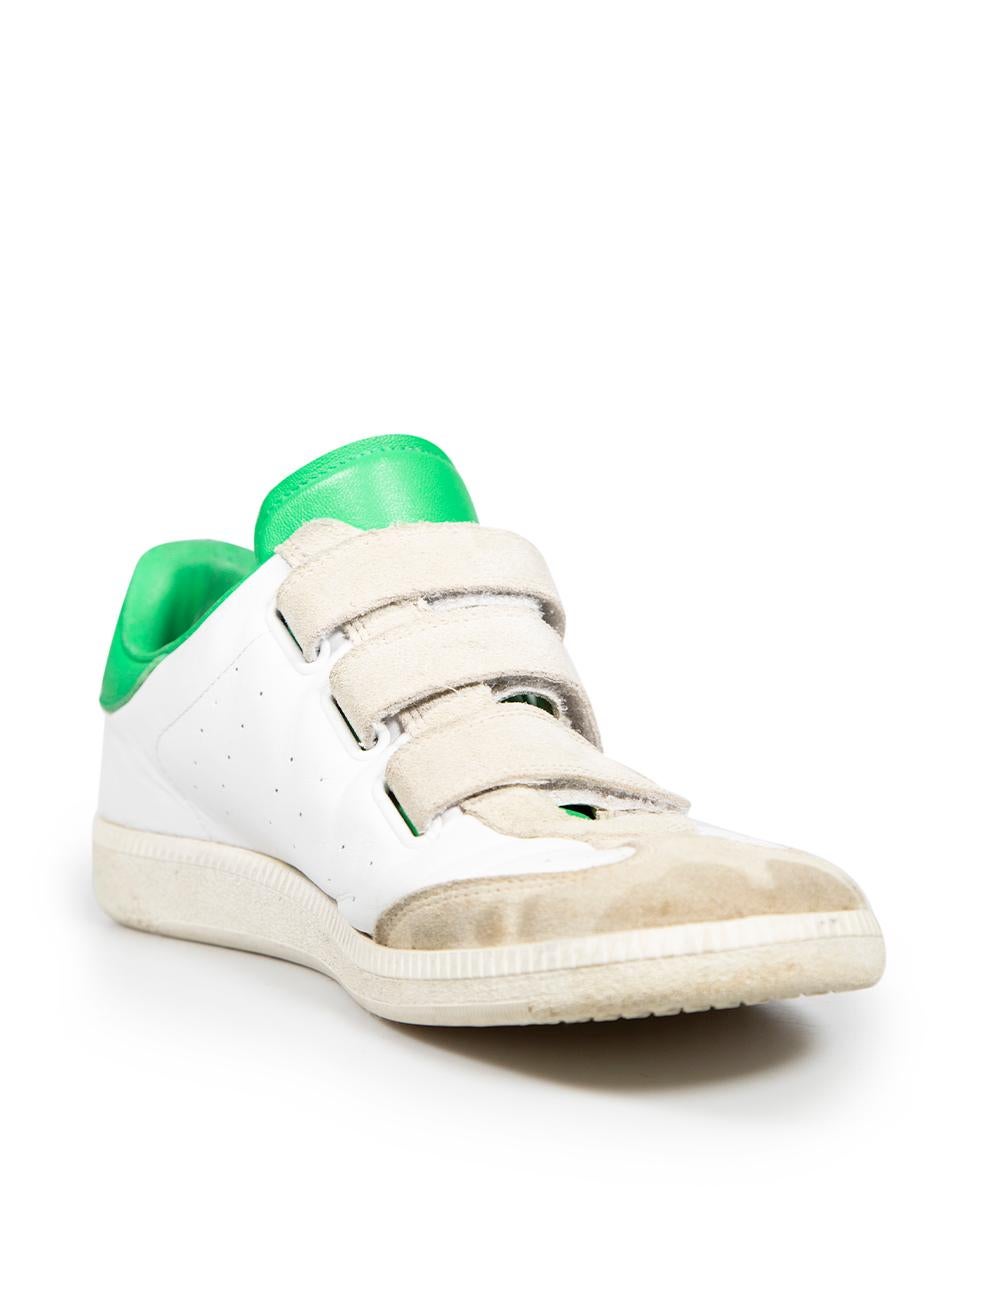 Condition is Good. Visible wear to trainers is evident. Wear to soles and insoles, with some creasing around the upper and absrasion to the inside heel area is evident on this used Isabel Marant designer item
 
 Details
 White
 Leather
 Trainers
